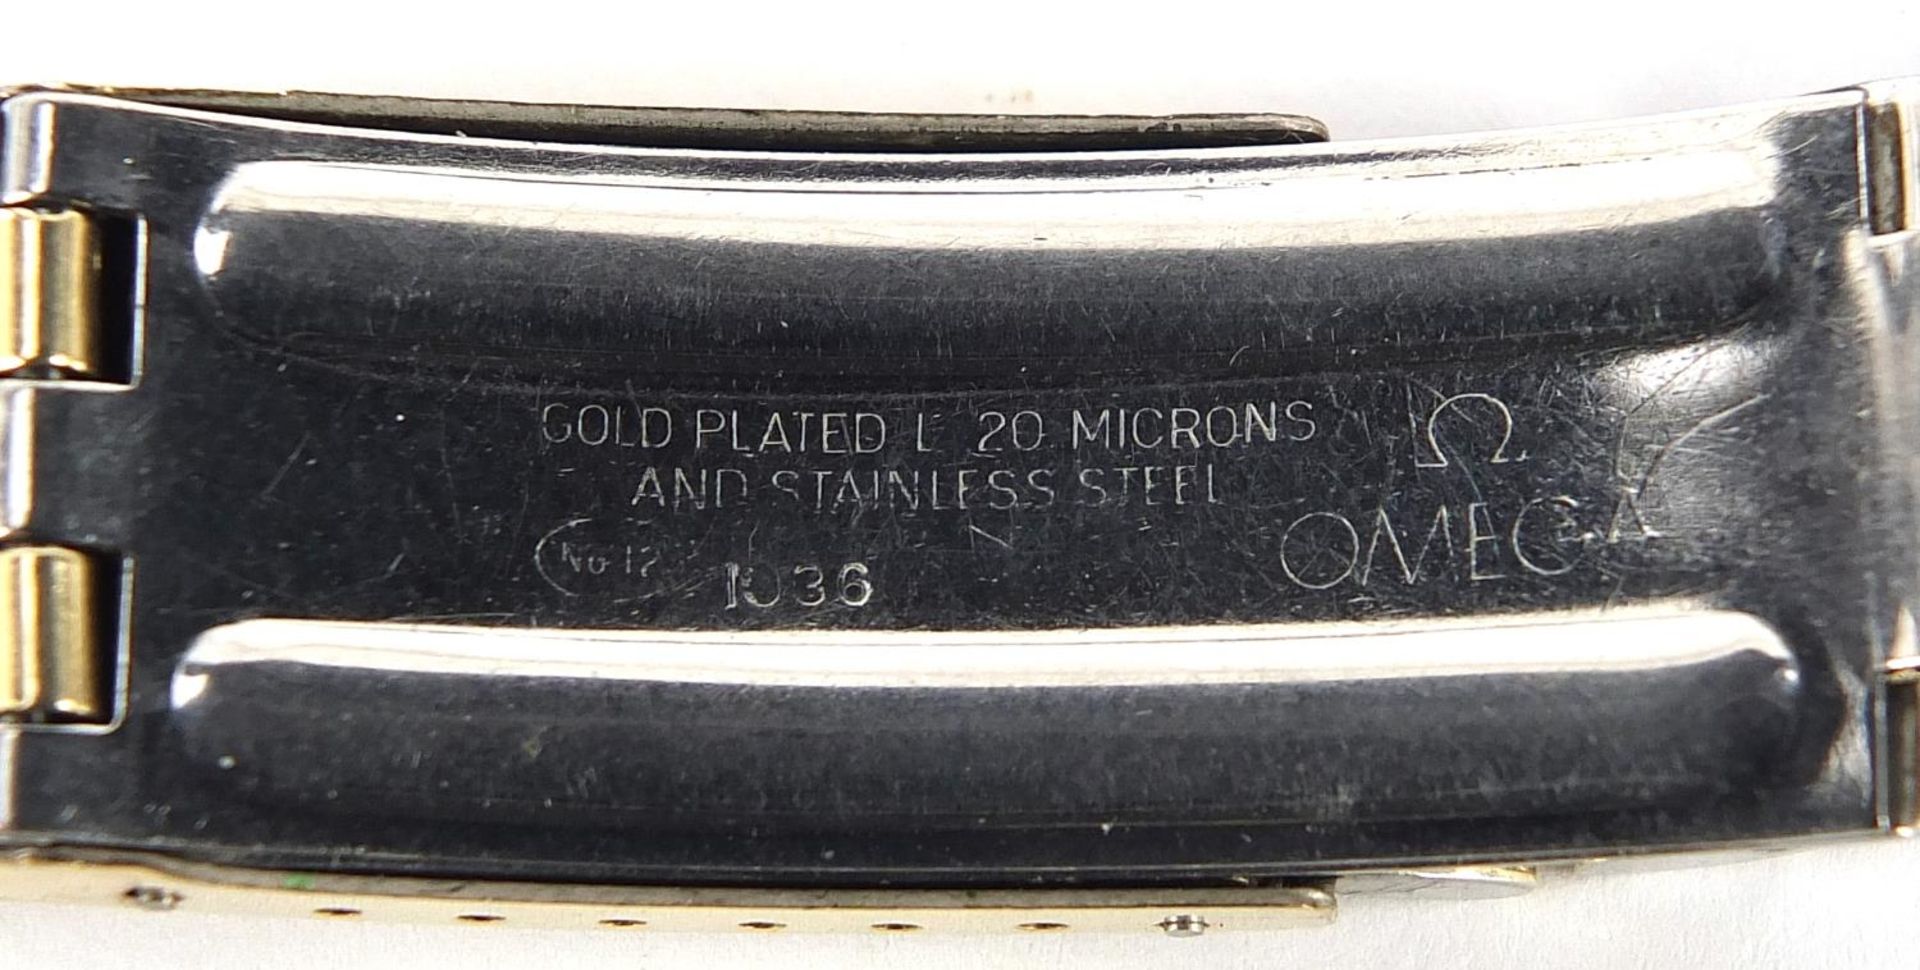 Omega, gentlemen's wristwatch strap no 12 numbered 1036 - Image 3 of 3